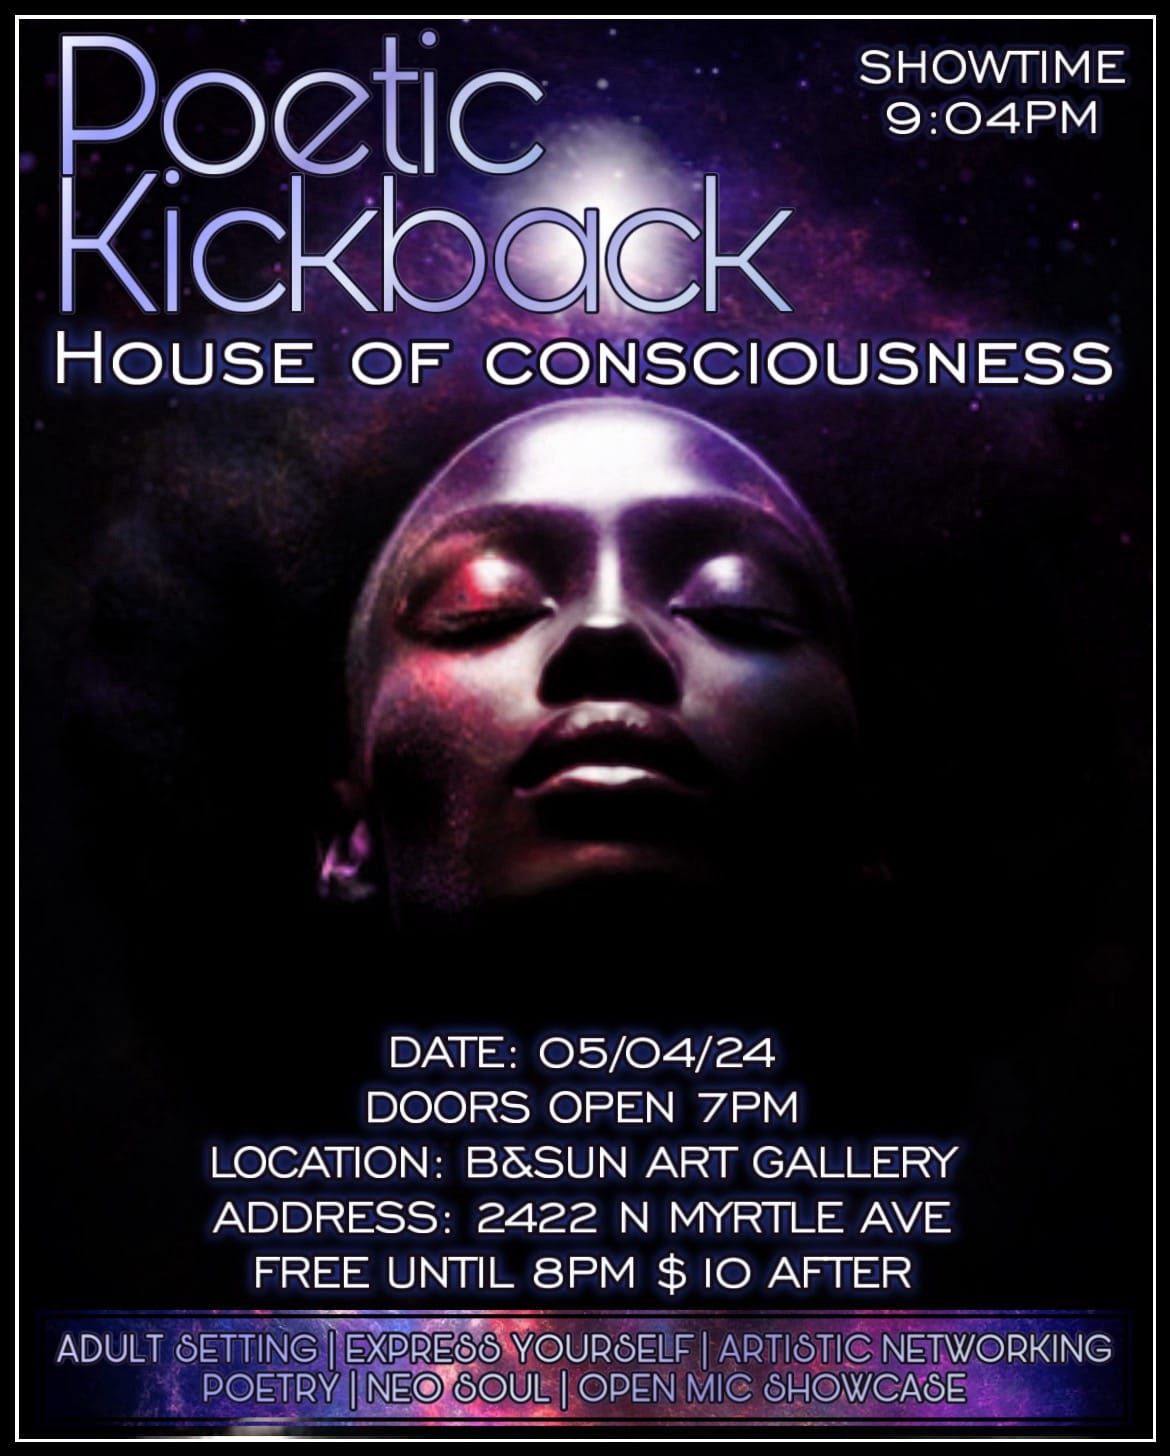 POETIC-KICKBACK MAY 4TH THE HOUSE OF CONSCIOUSNESS 